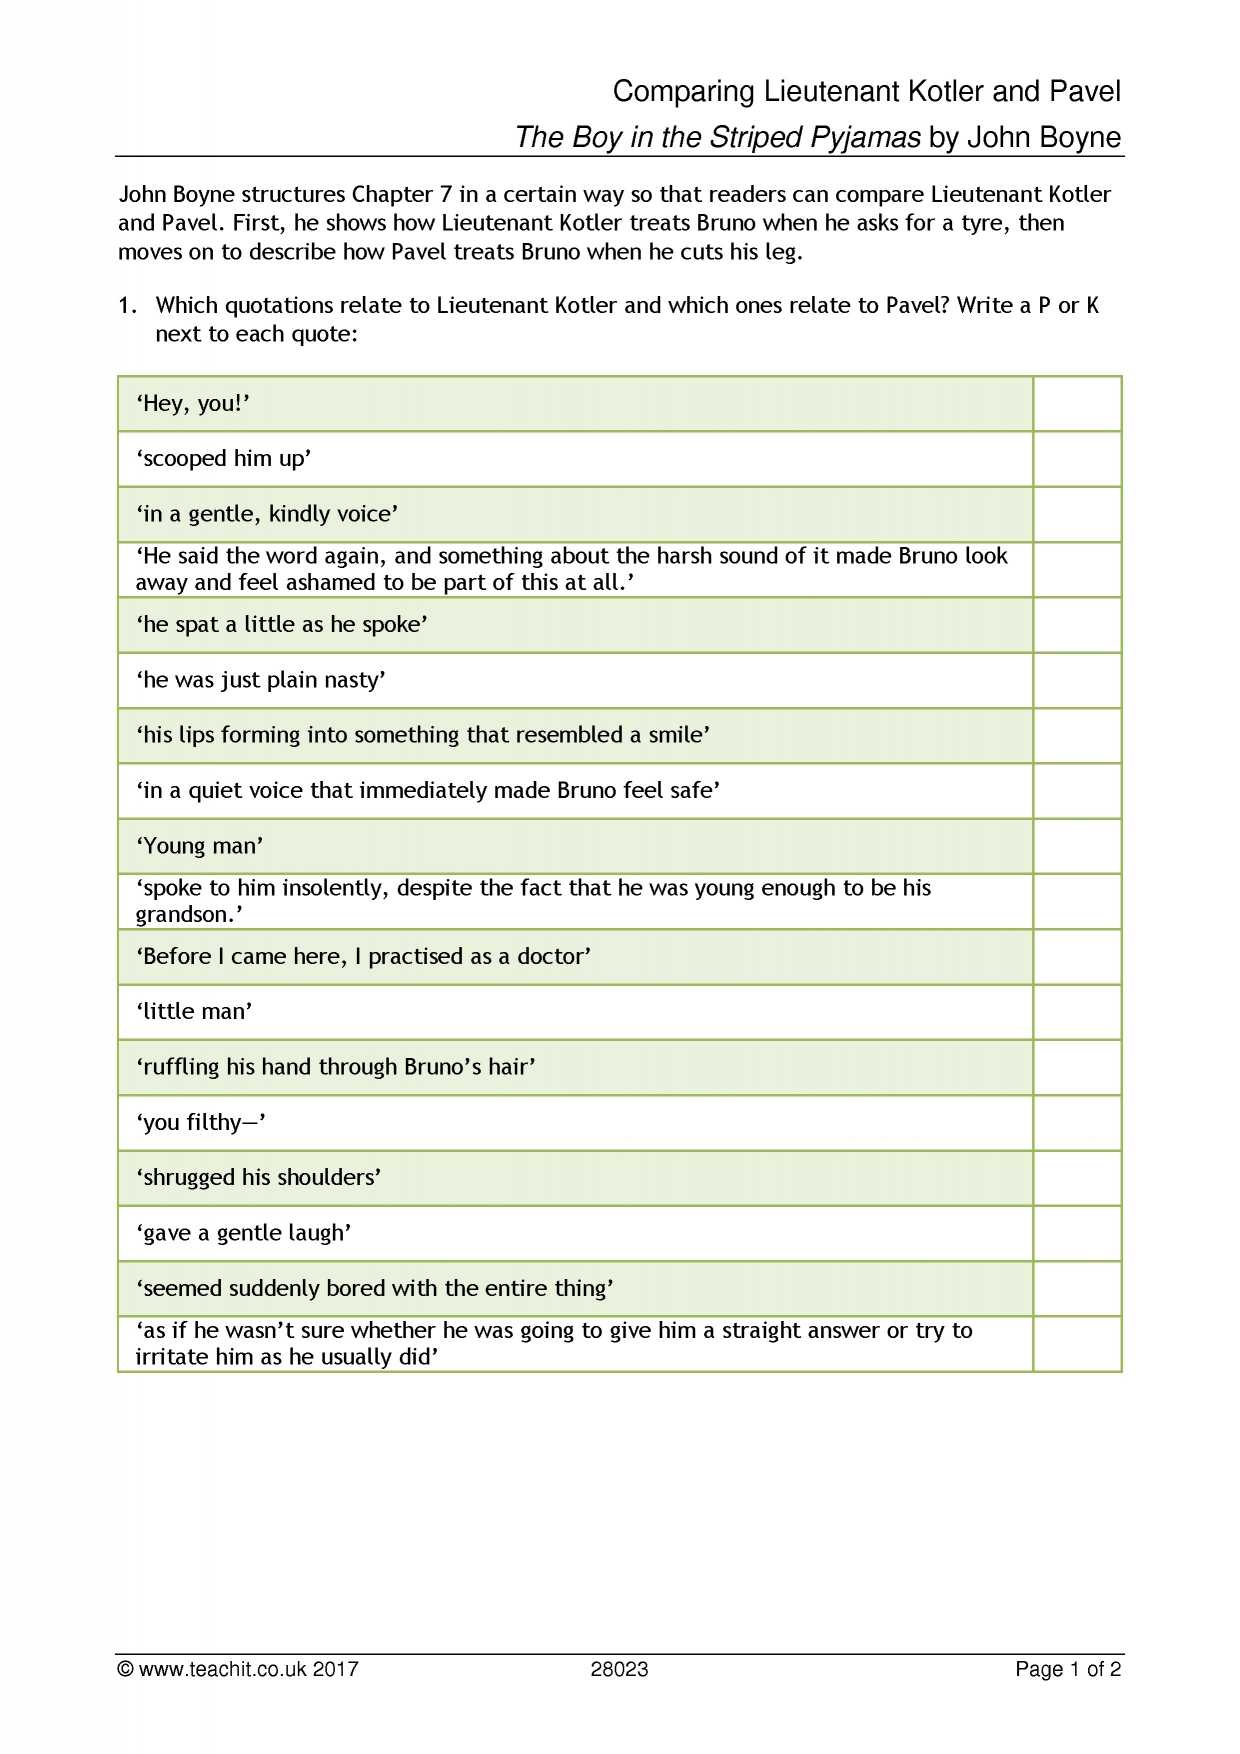 13 Colonies Reading Comprehension Worksheet with Ks3 Prose the Boy In the Striped Pyjamas